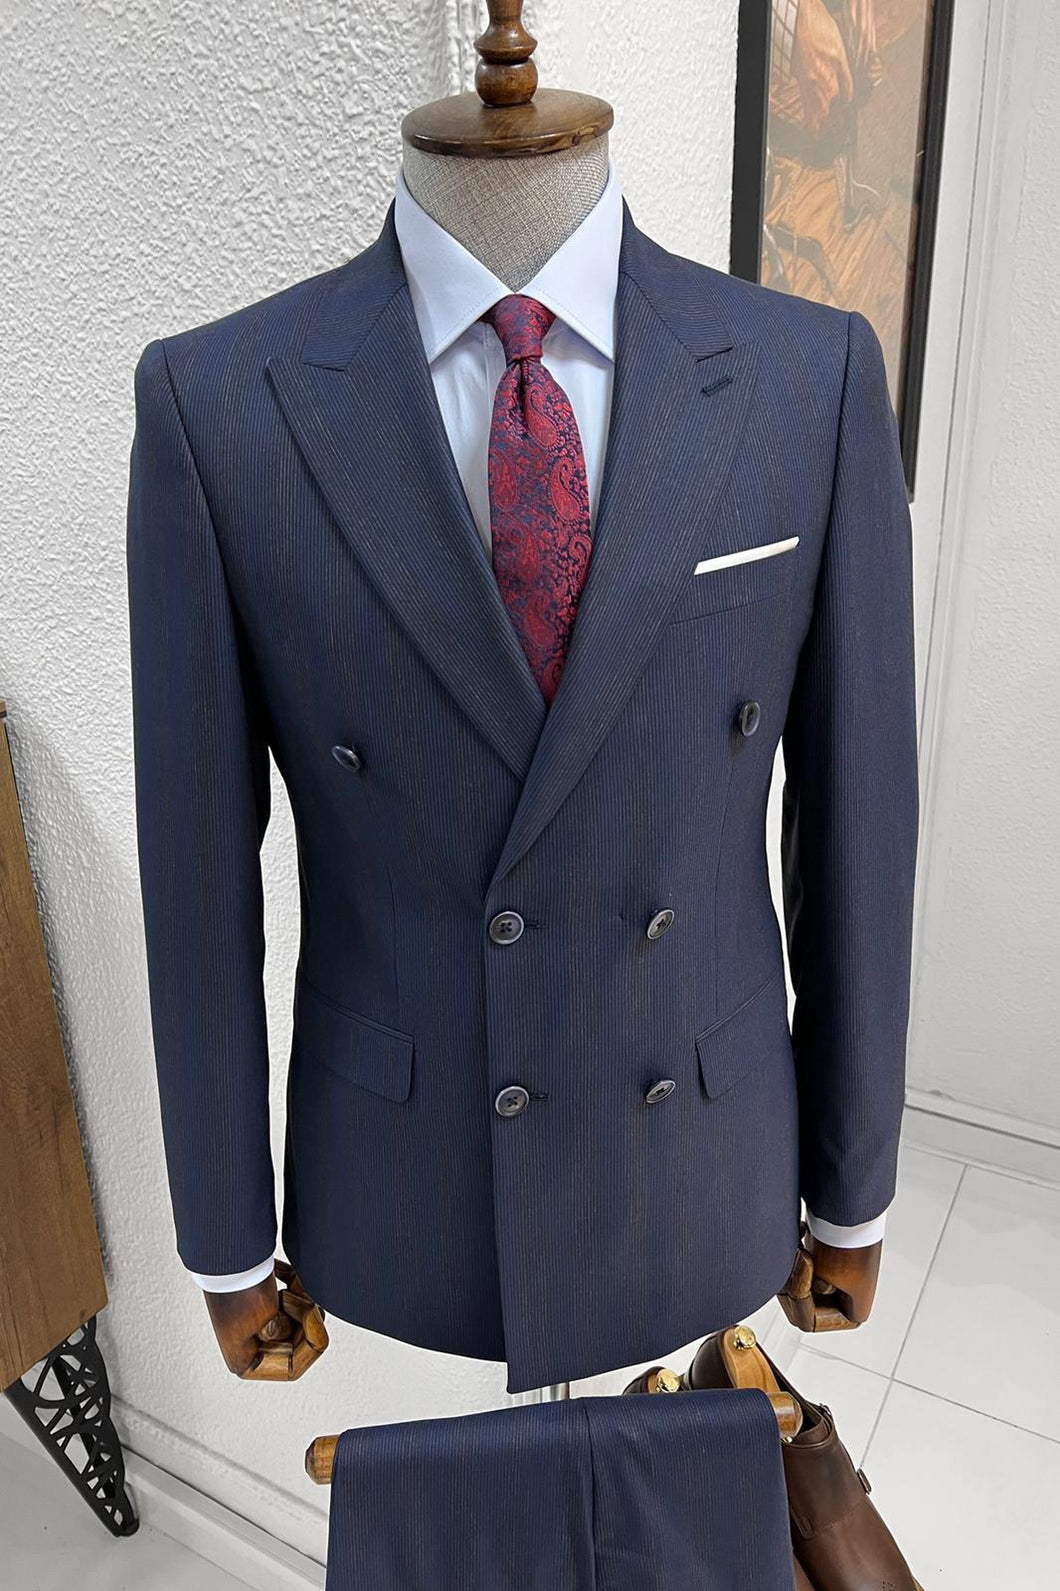 Simon Slim Fit Double Breasted Striped Navy Woolen Suit